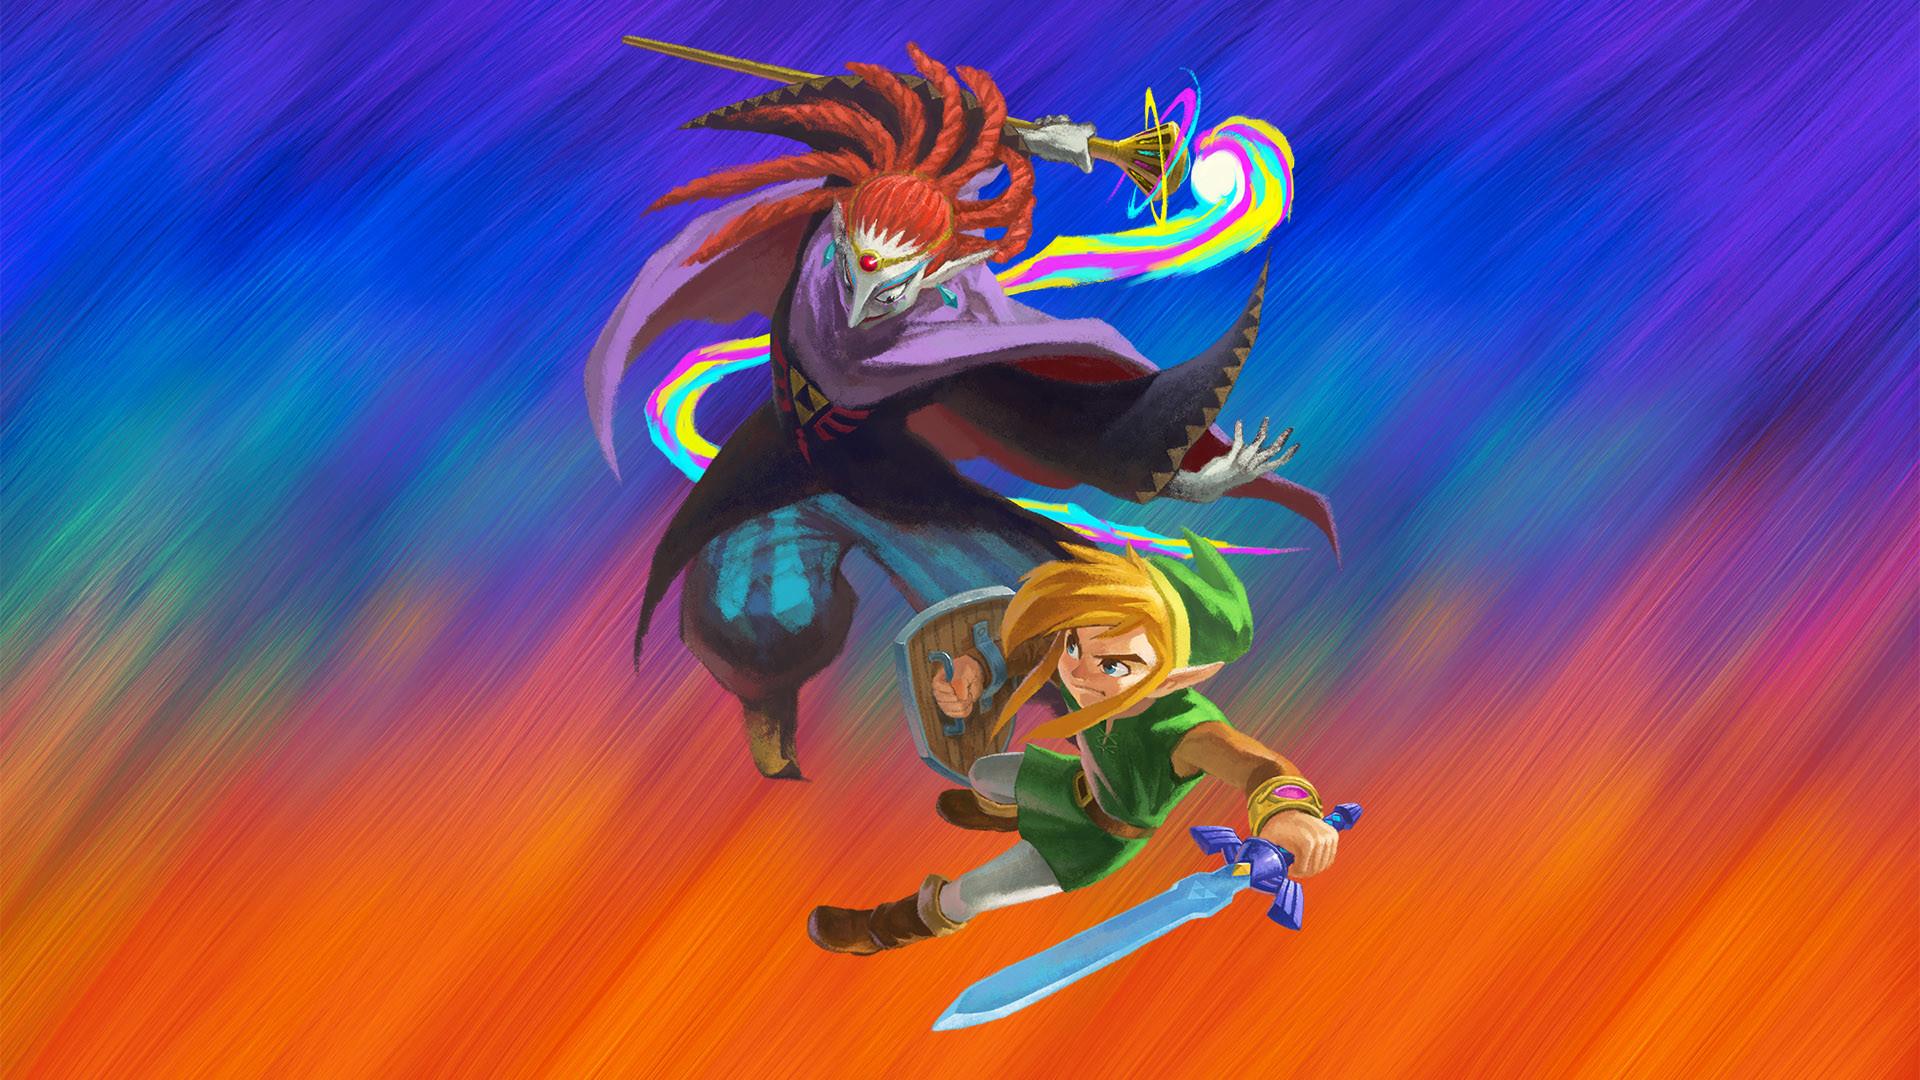 Link Wallpaper background picture